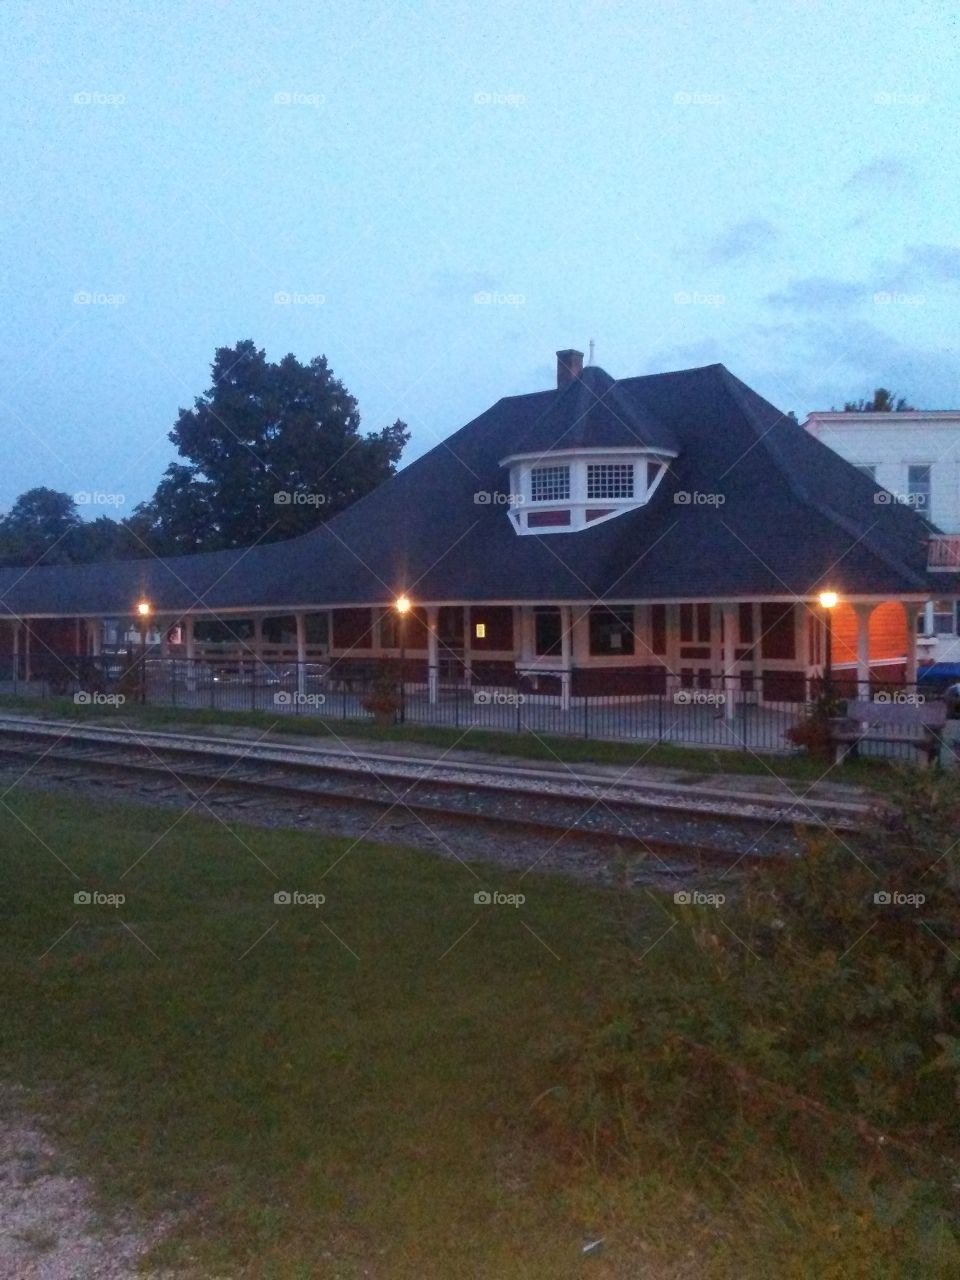 Trackside view of the train depot in Elkhart Lake, Wisconsin.